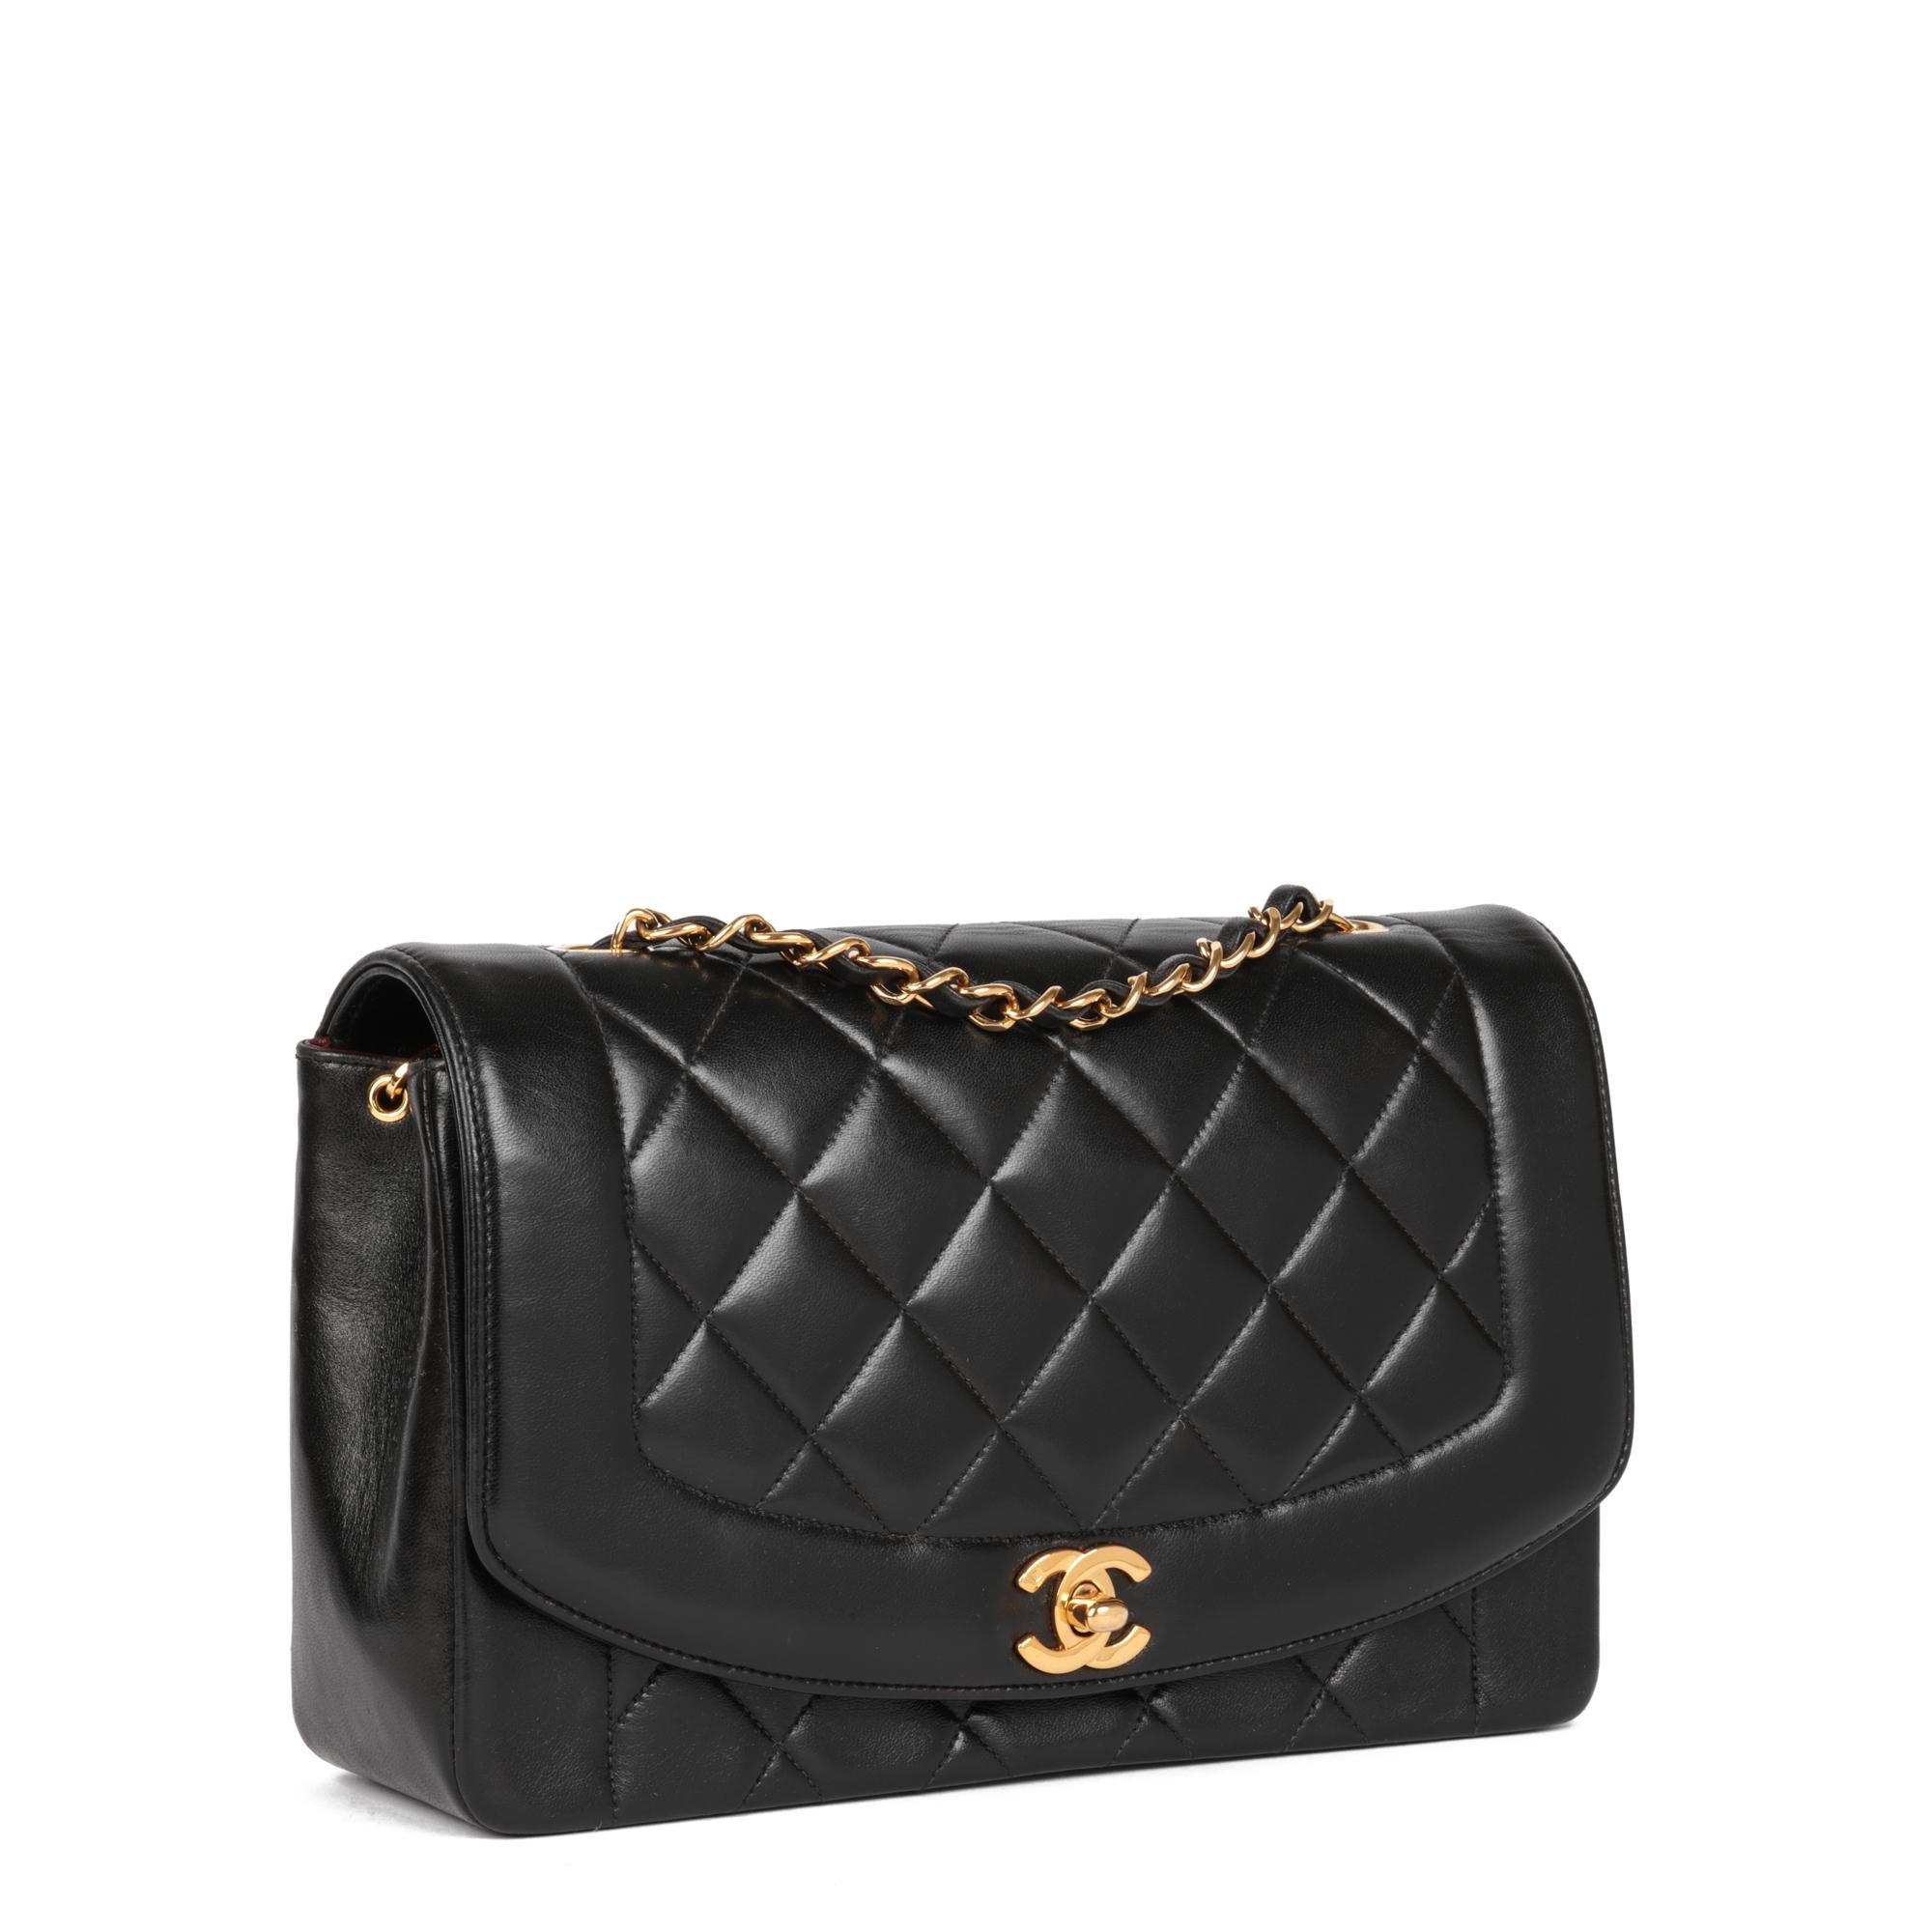 CHANEL
Black Quilted Lambskin Vintage Medium Diana Classic Single Flap Bag

Serial Number: 2696259
Age (Circa): 1993
Accompanied By: Chanel Dust Bag, Authenticity Card, Box
Authenticity Details: Authenticity Card, Serial Sticker (Made in